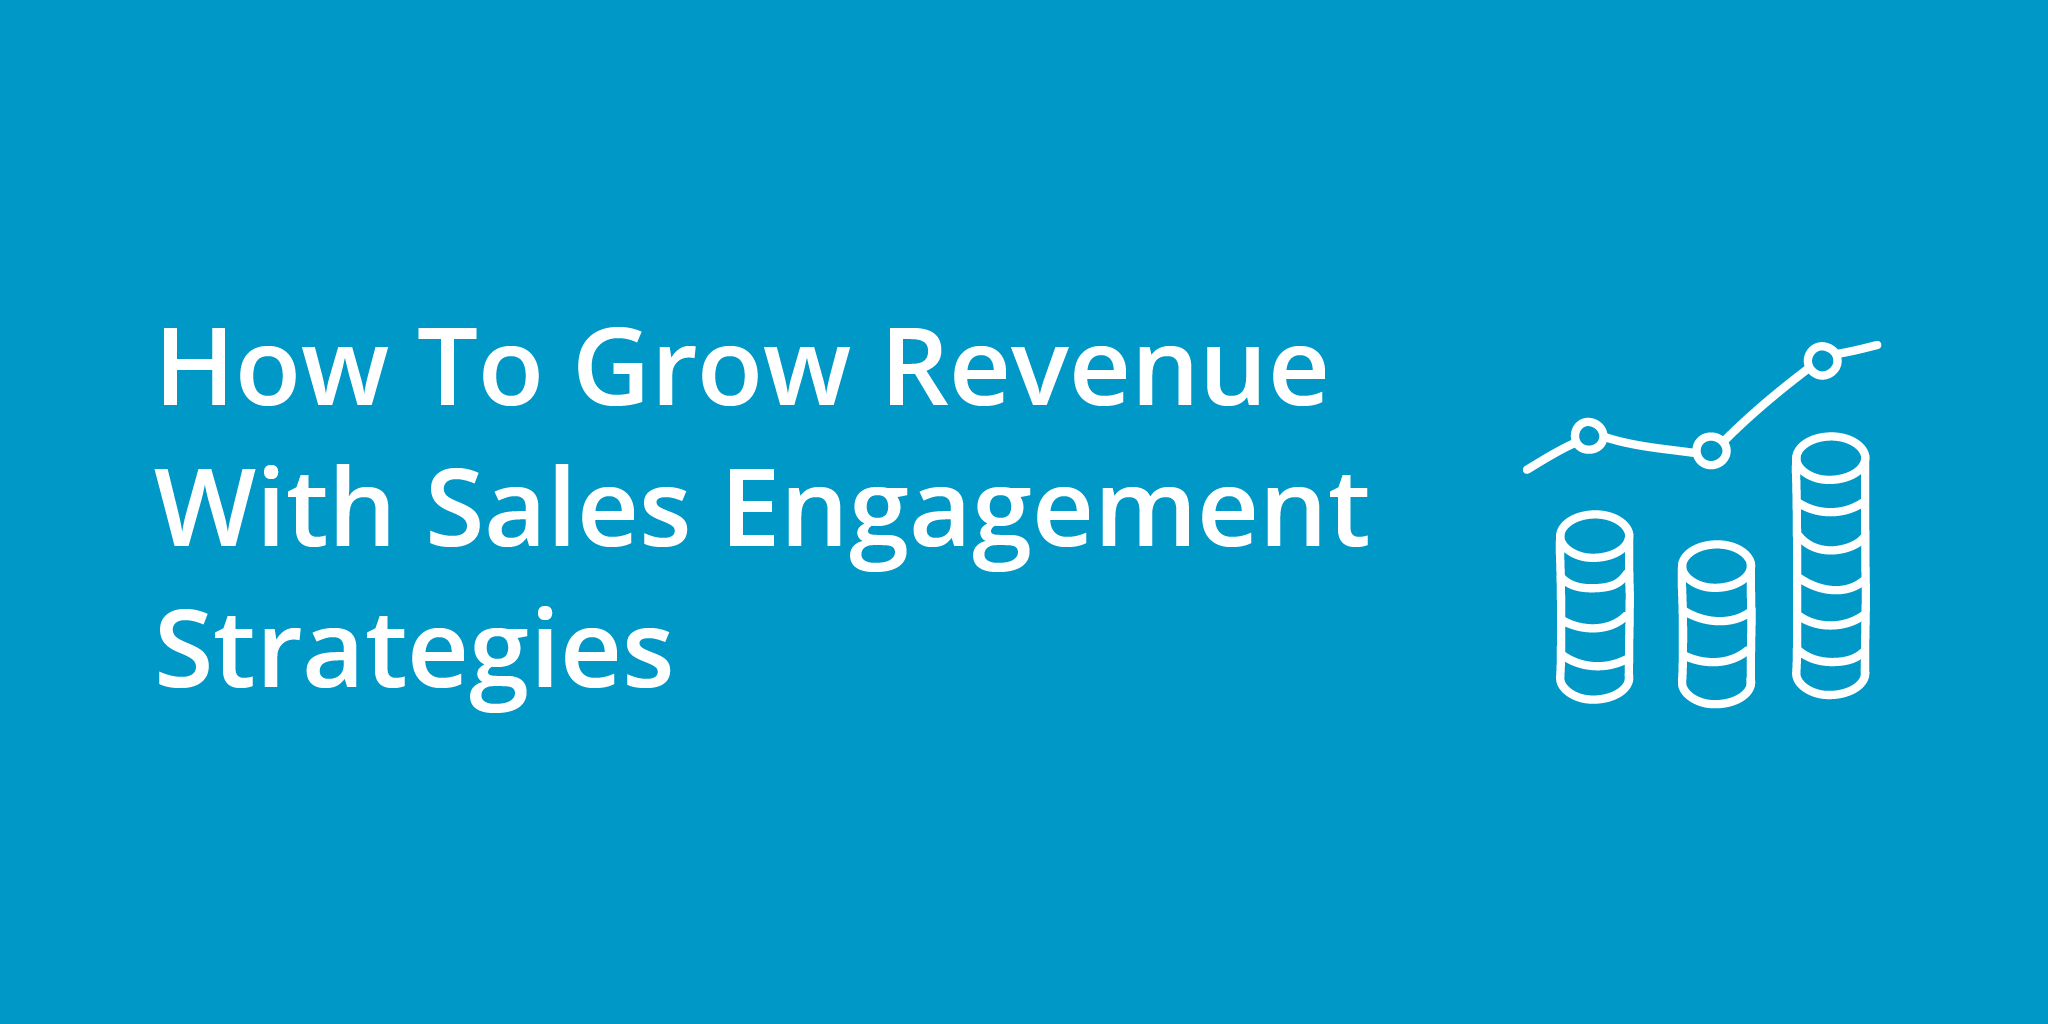 How To Grow Revenue With Sales Engagement Strategies